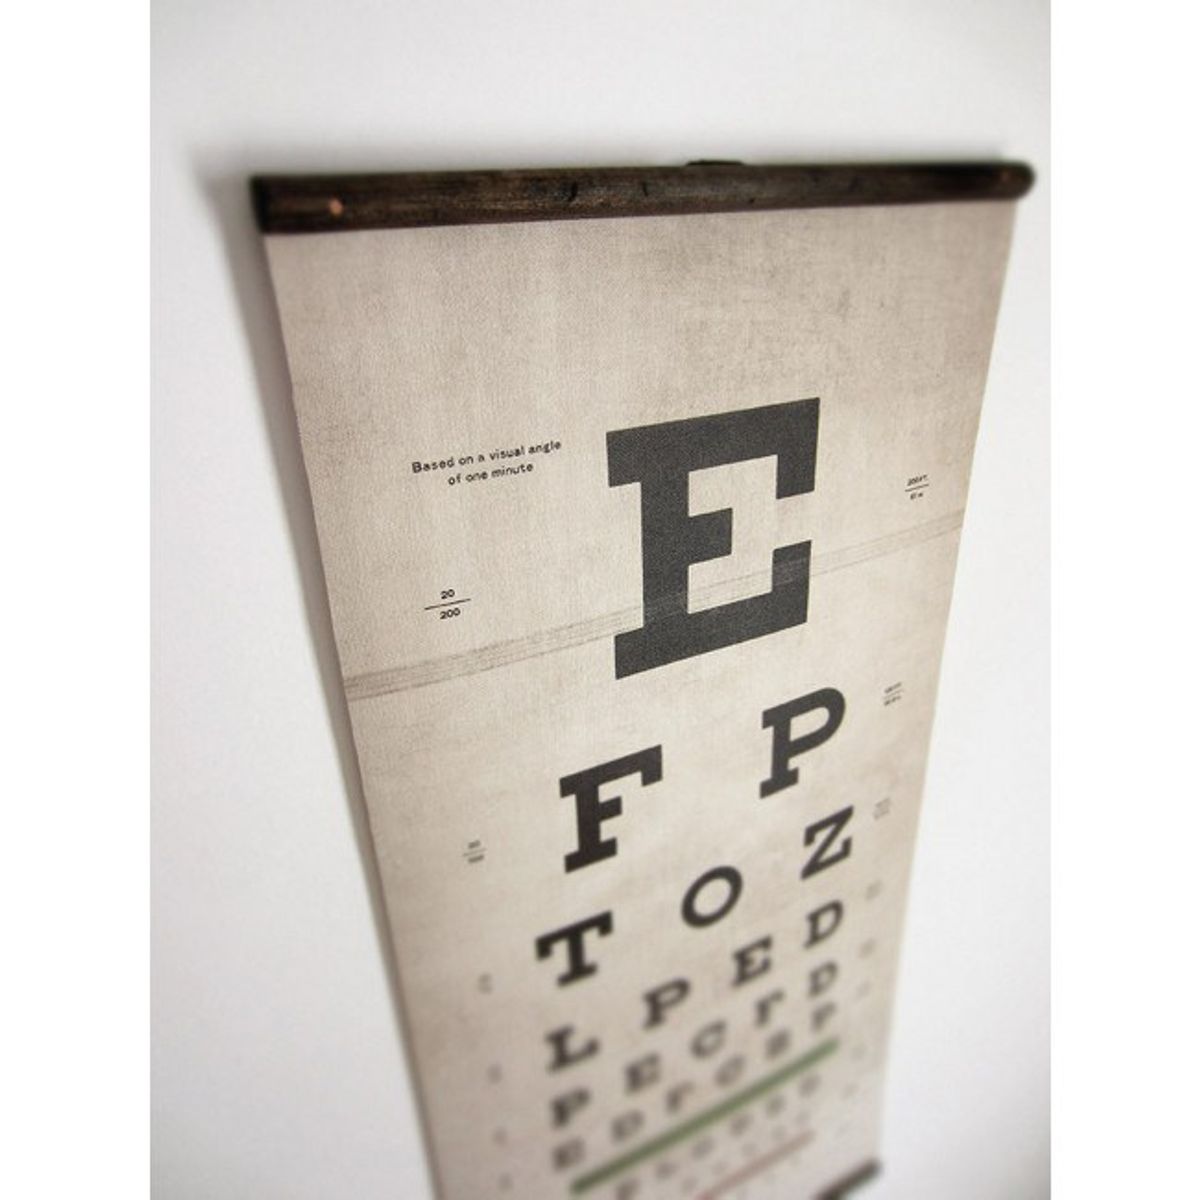 It's National Eye Exam Month!